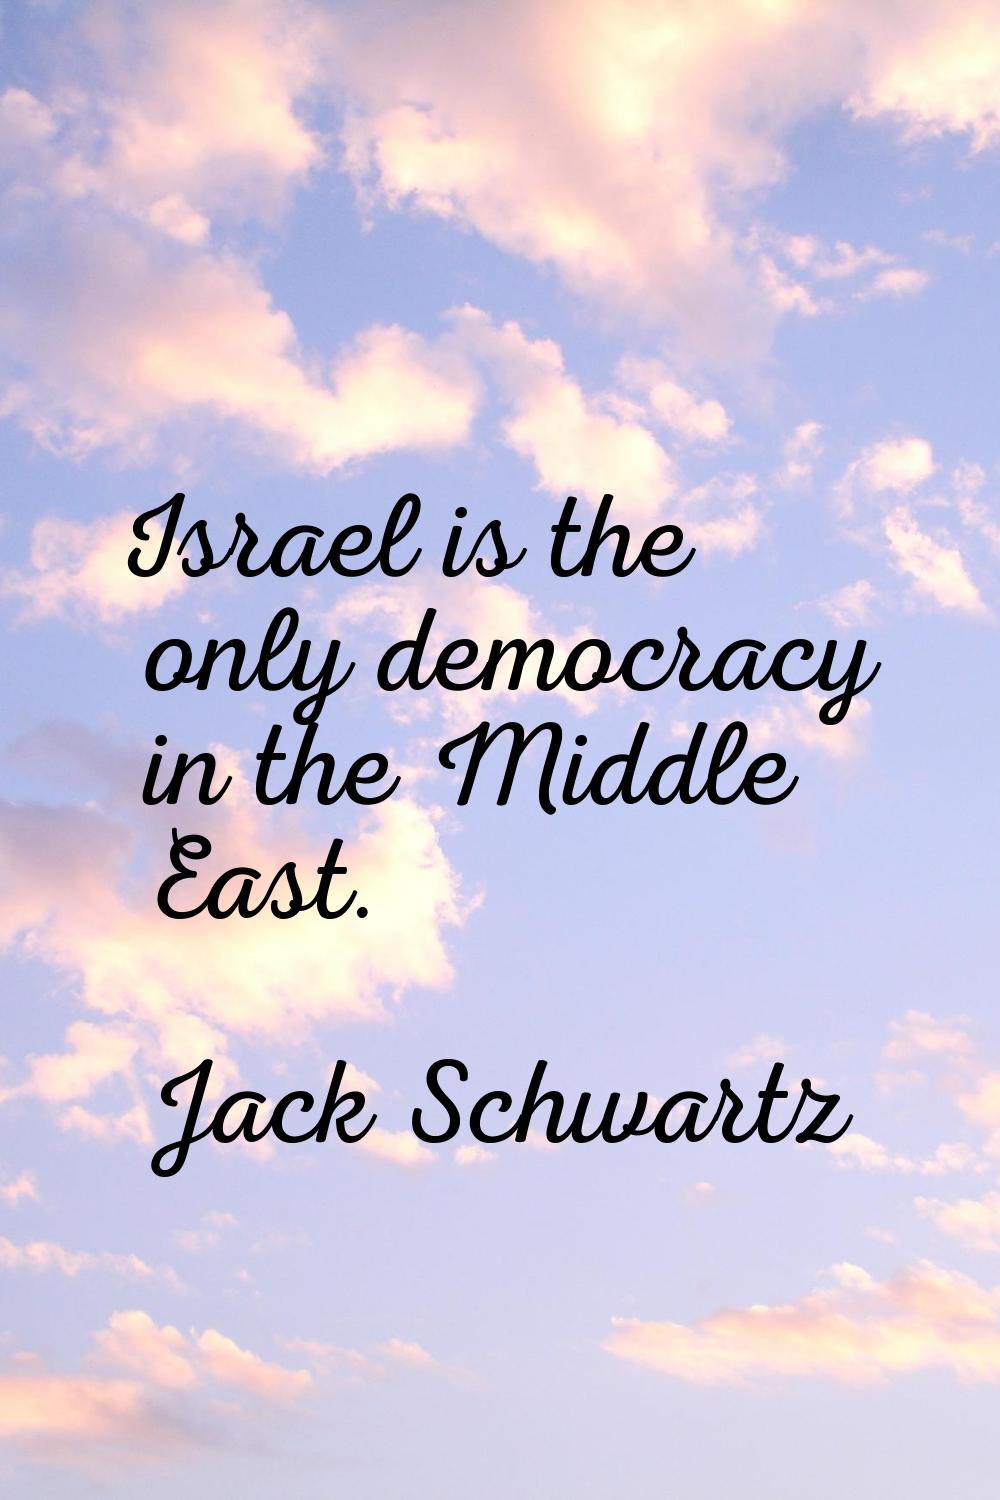 Israel is the only democracy in the Middle East.